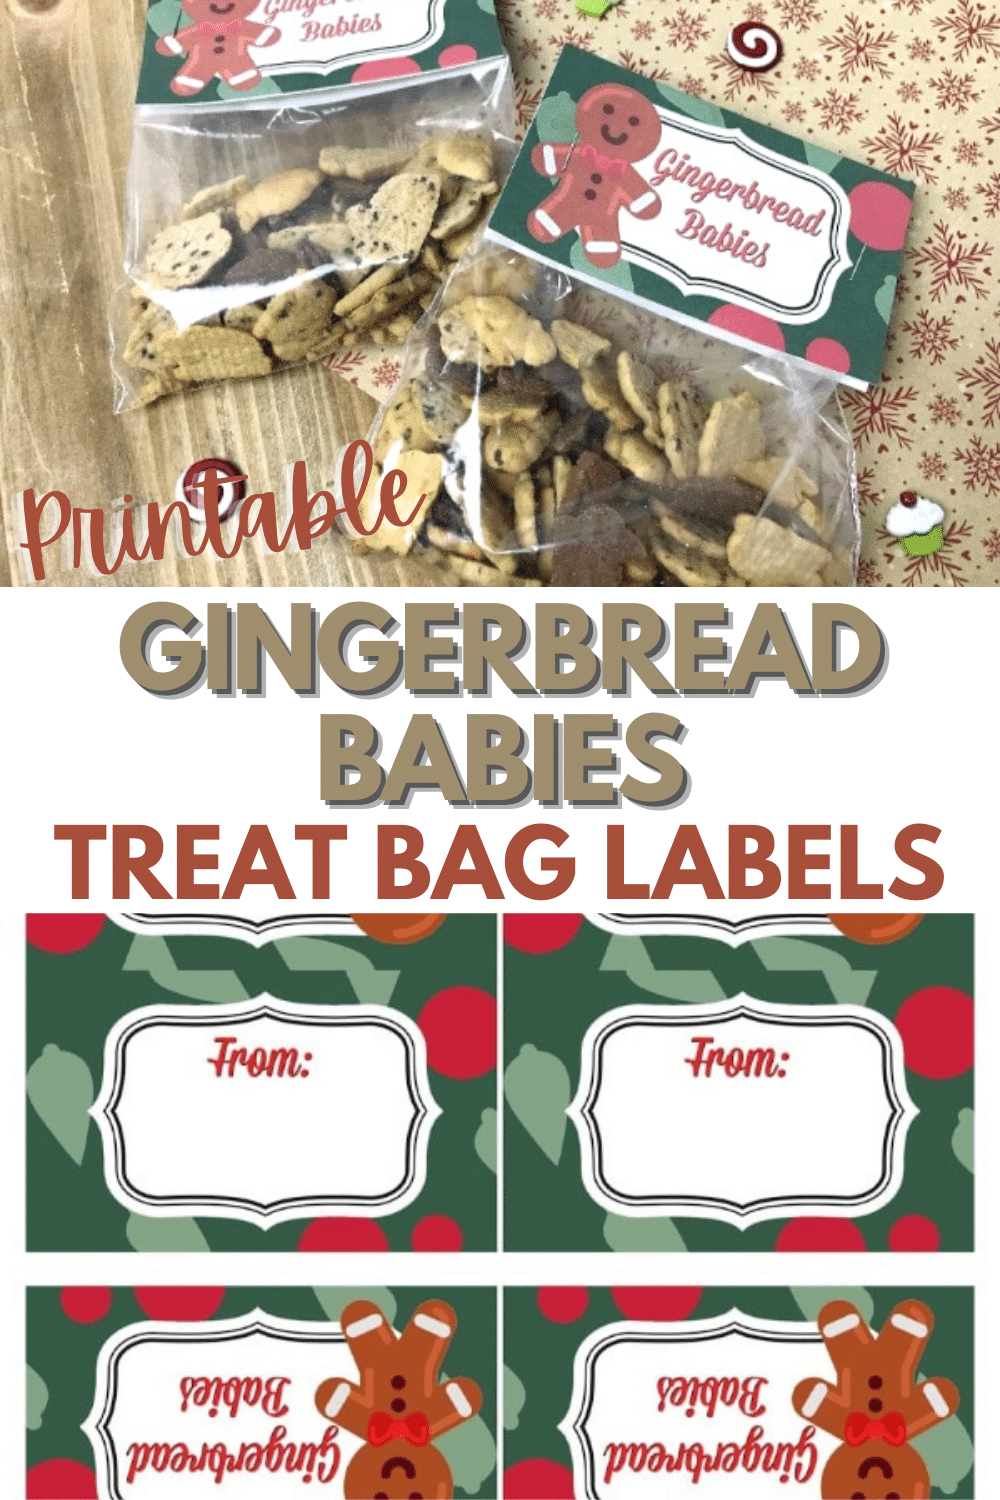 These Gingerbread Babies Treat Bags are so easy to make with this printable treat bag topper. Add some Teddy Grahams and you are set with a great gift. #treatbags #printables #Christmas via @wondermomwannab